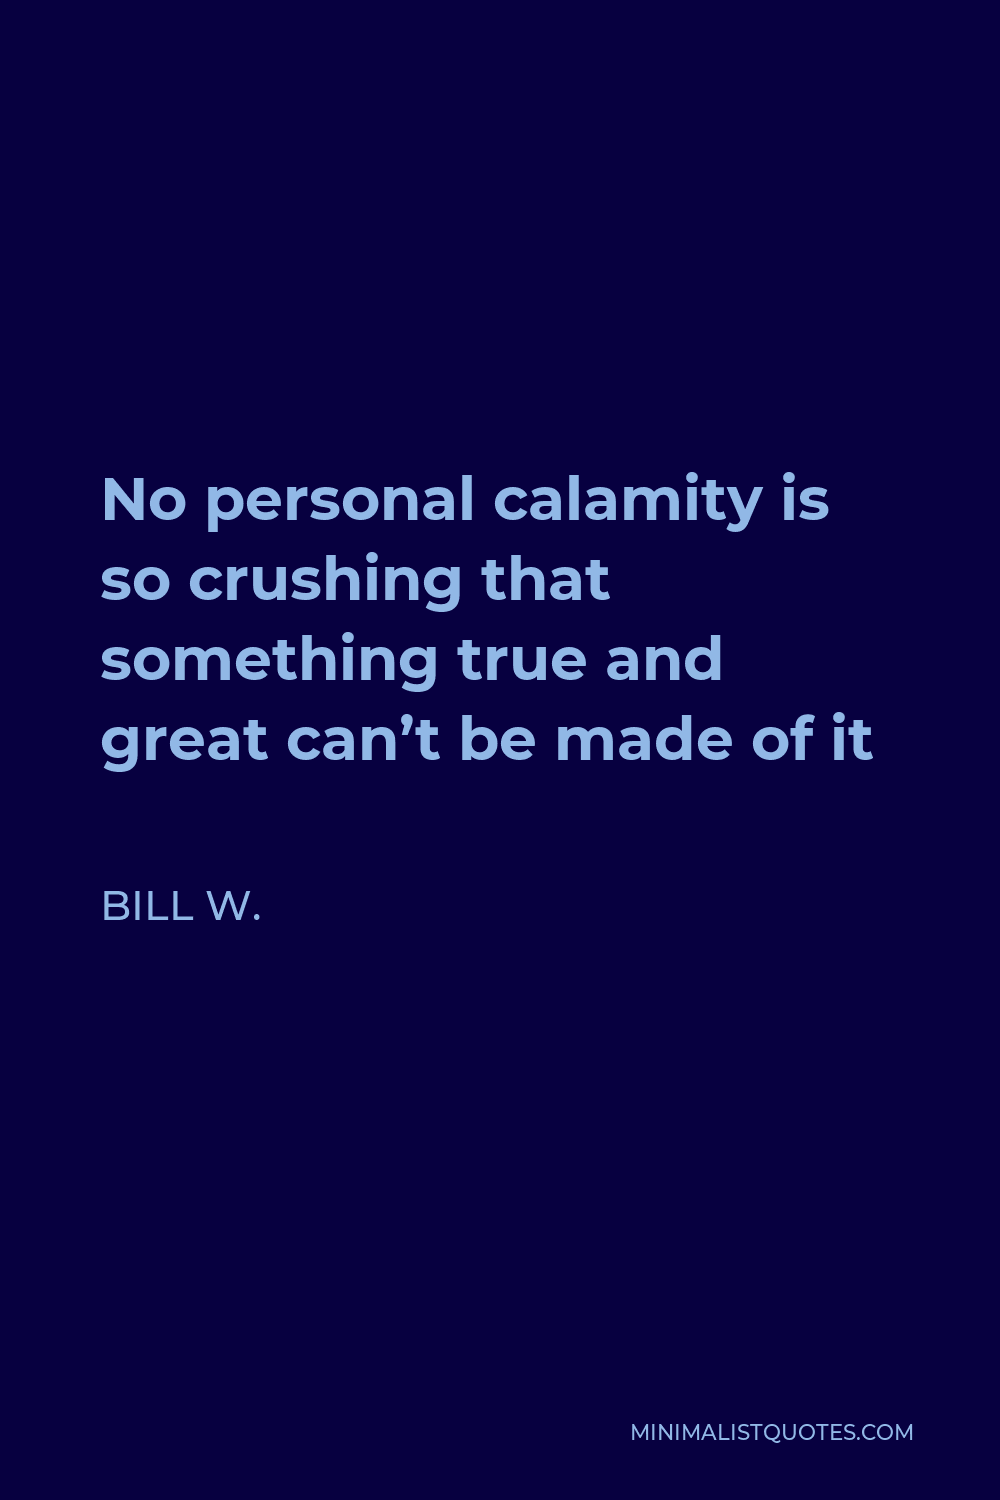 Bill W. Quote - No personal calamity is so crushing that something true and great can’t be made of it